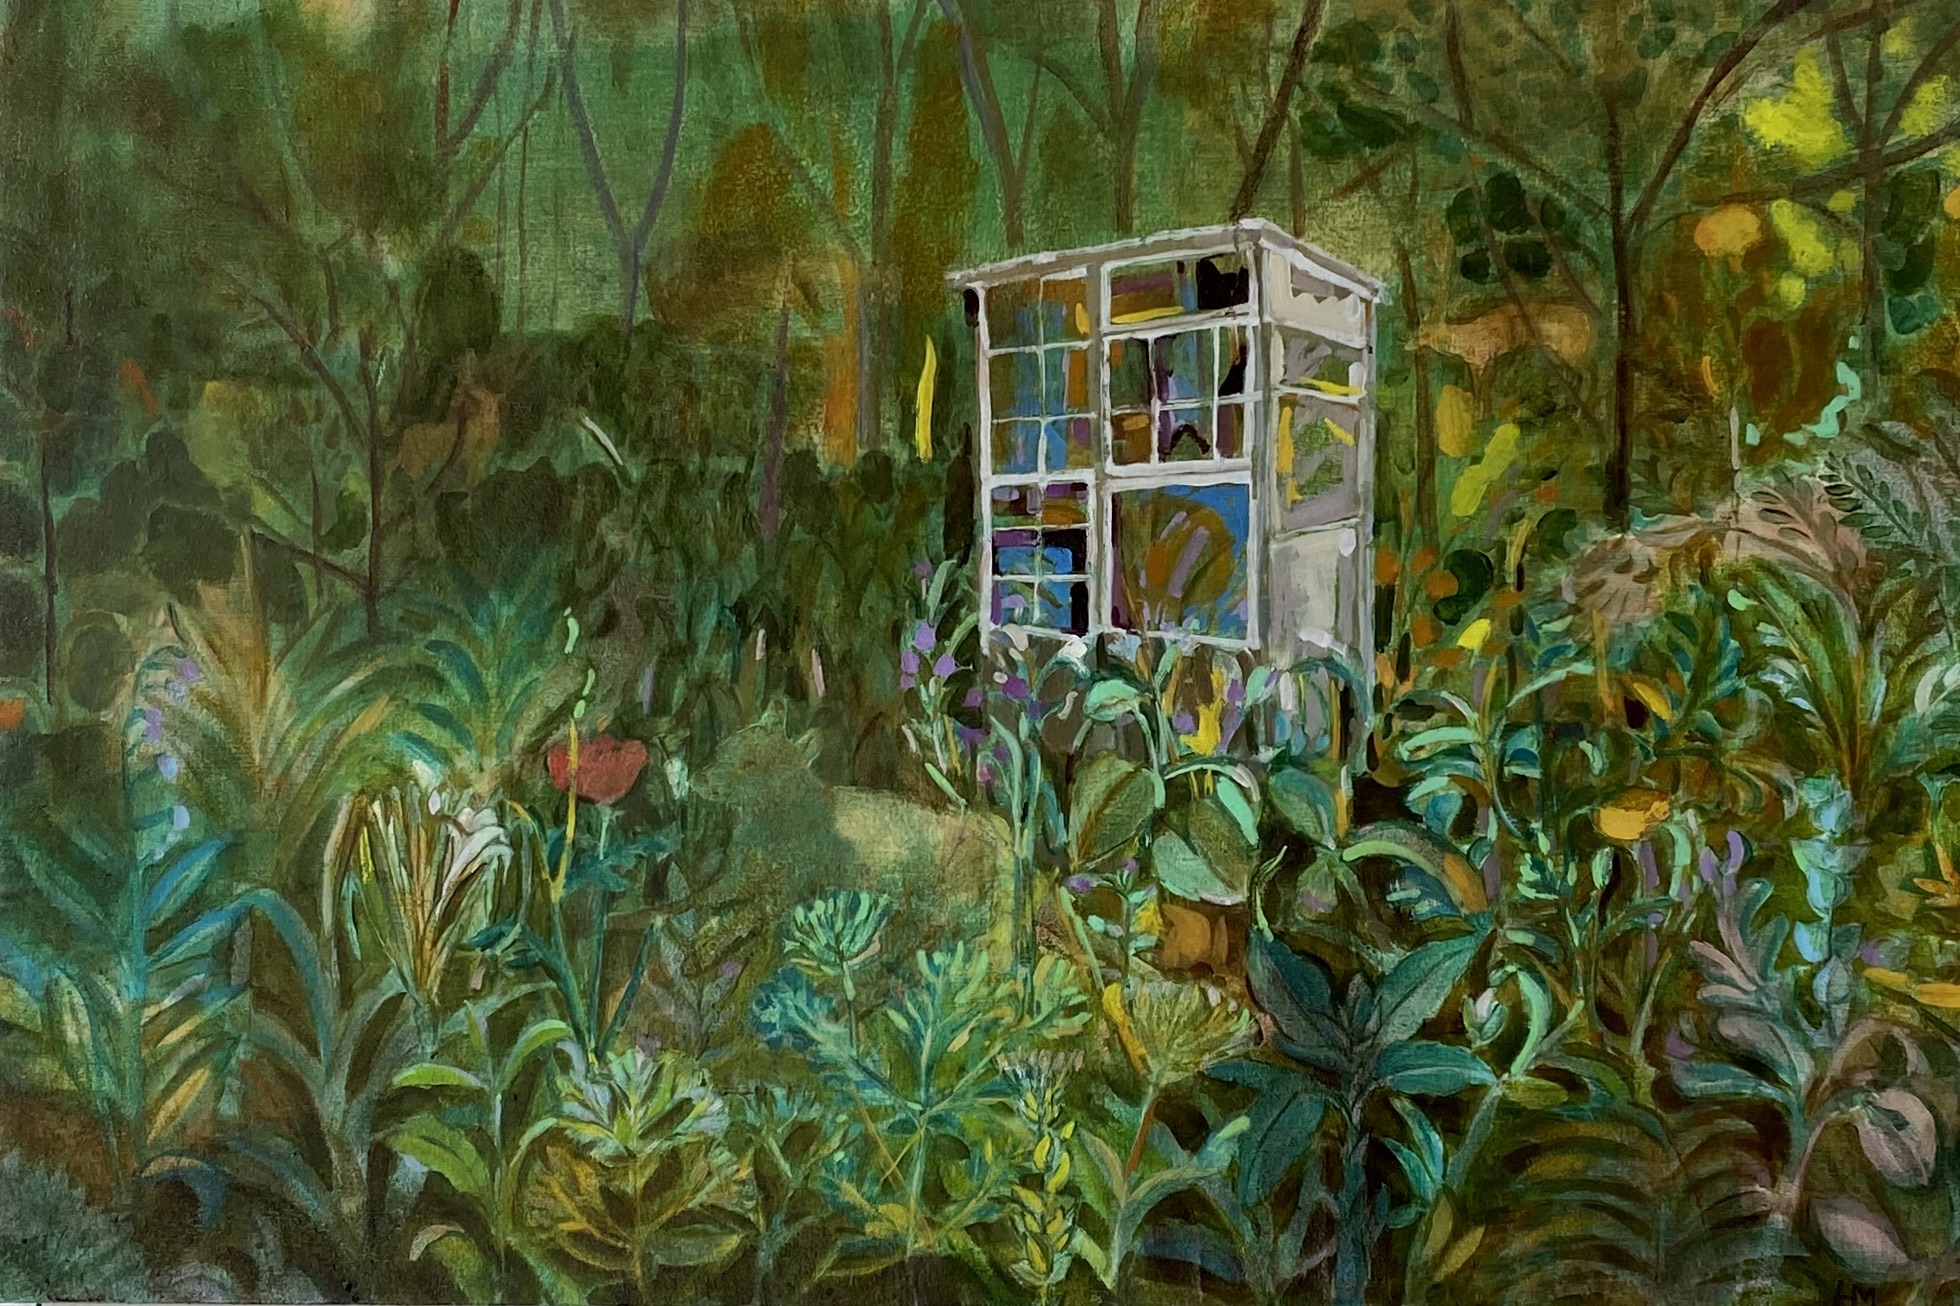 The painters' shack